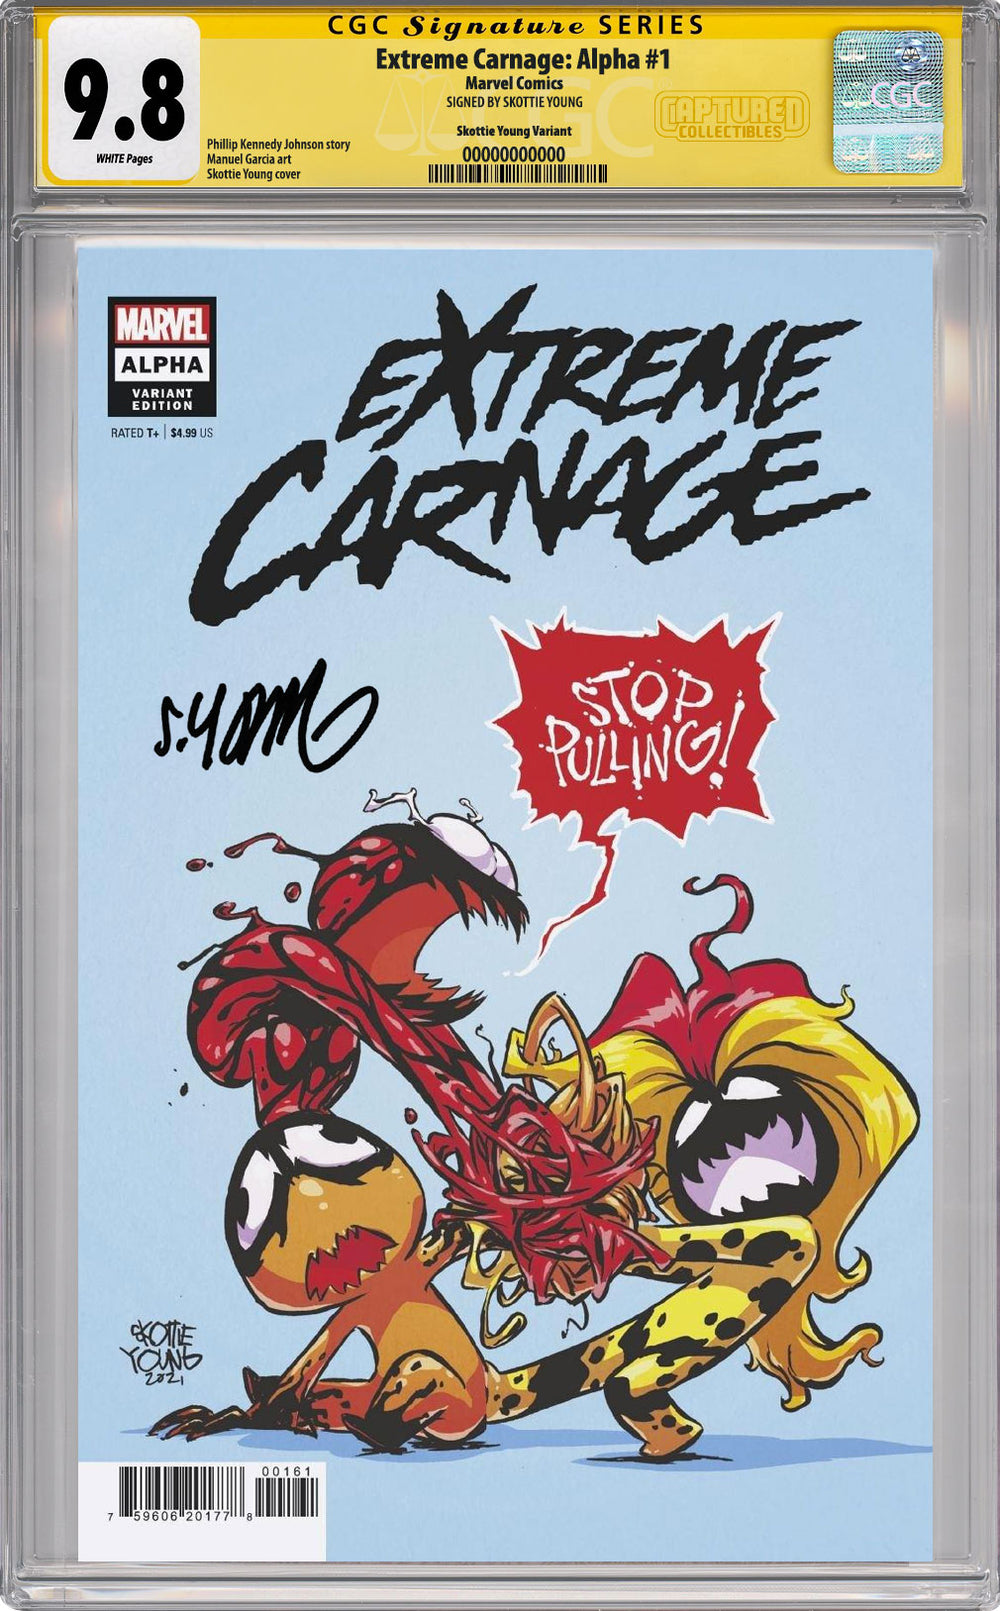 Extreme Carnage: Alpha #1 Variant CGC SS 9.8 Signed by Skottie Young